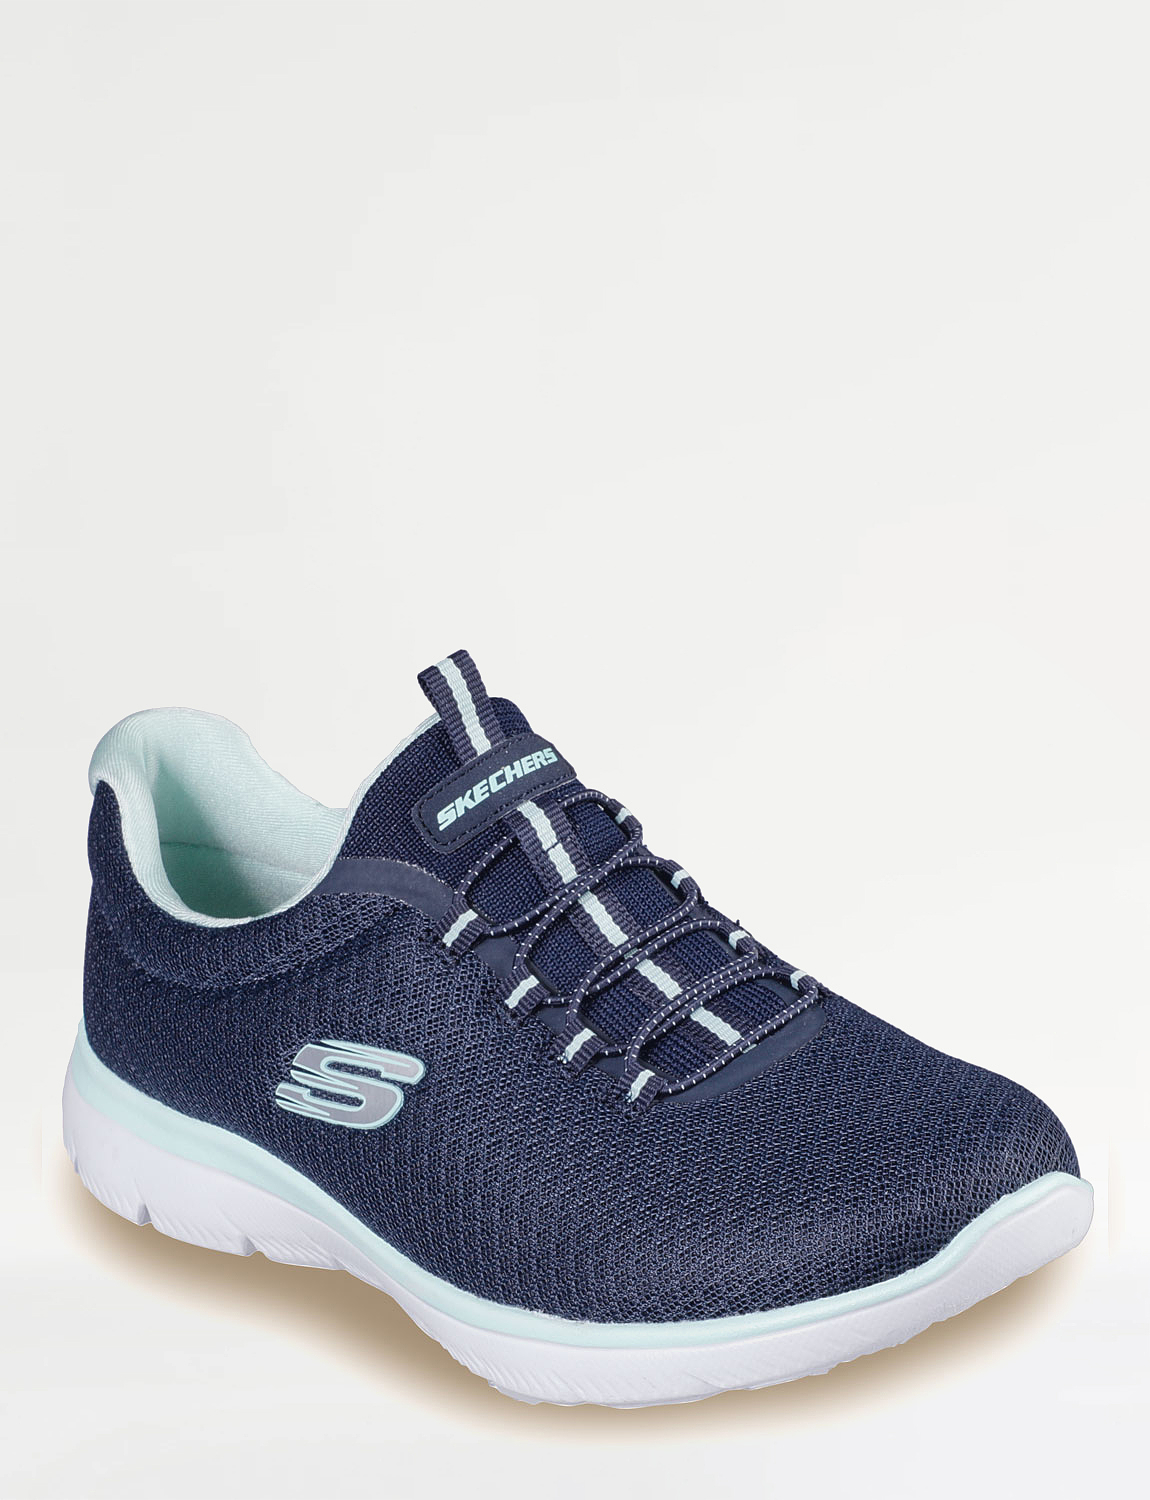 skechers fabric shoes